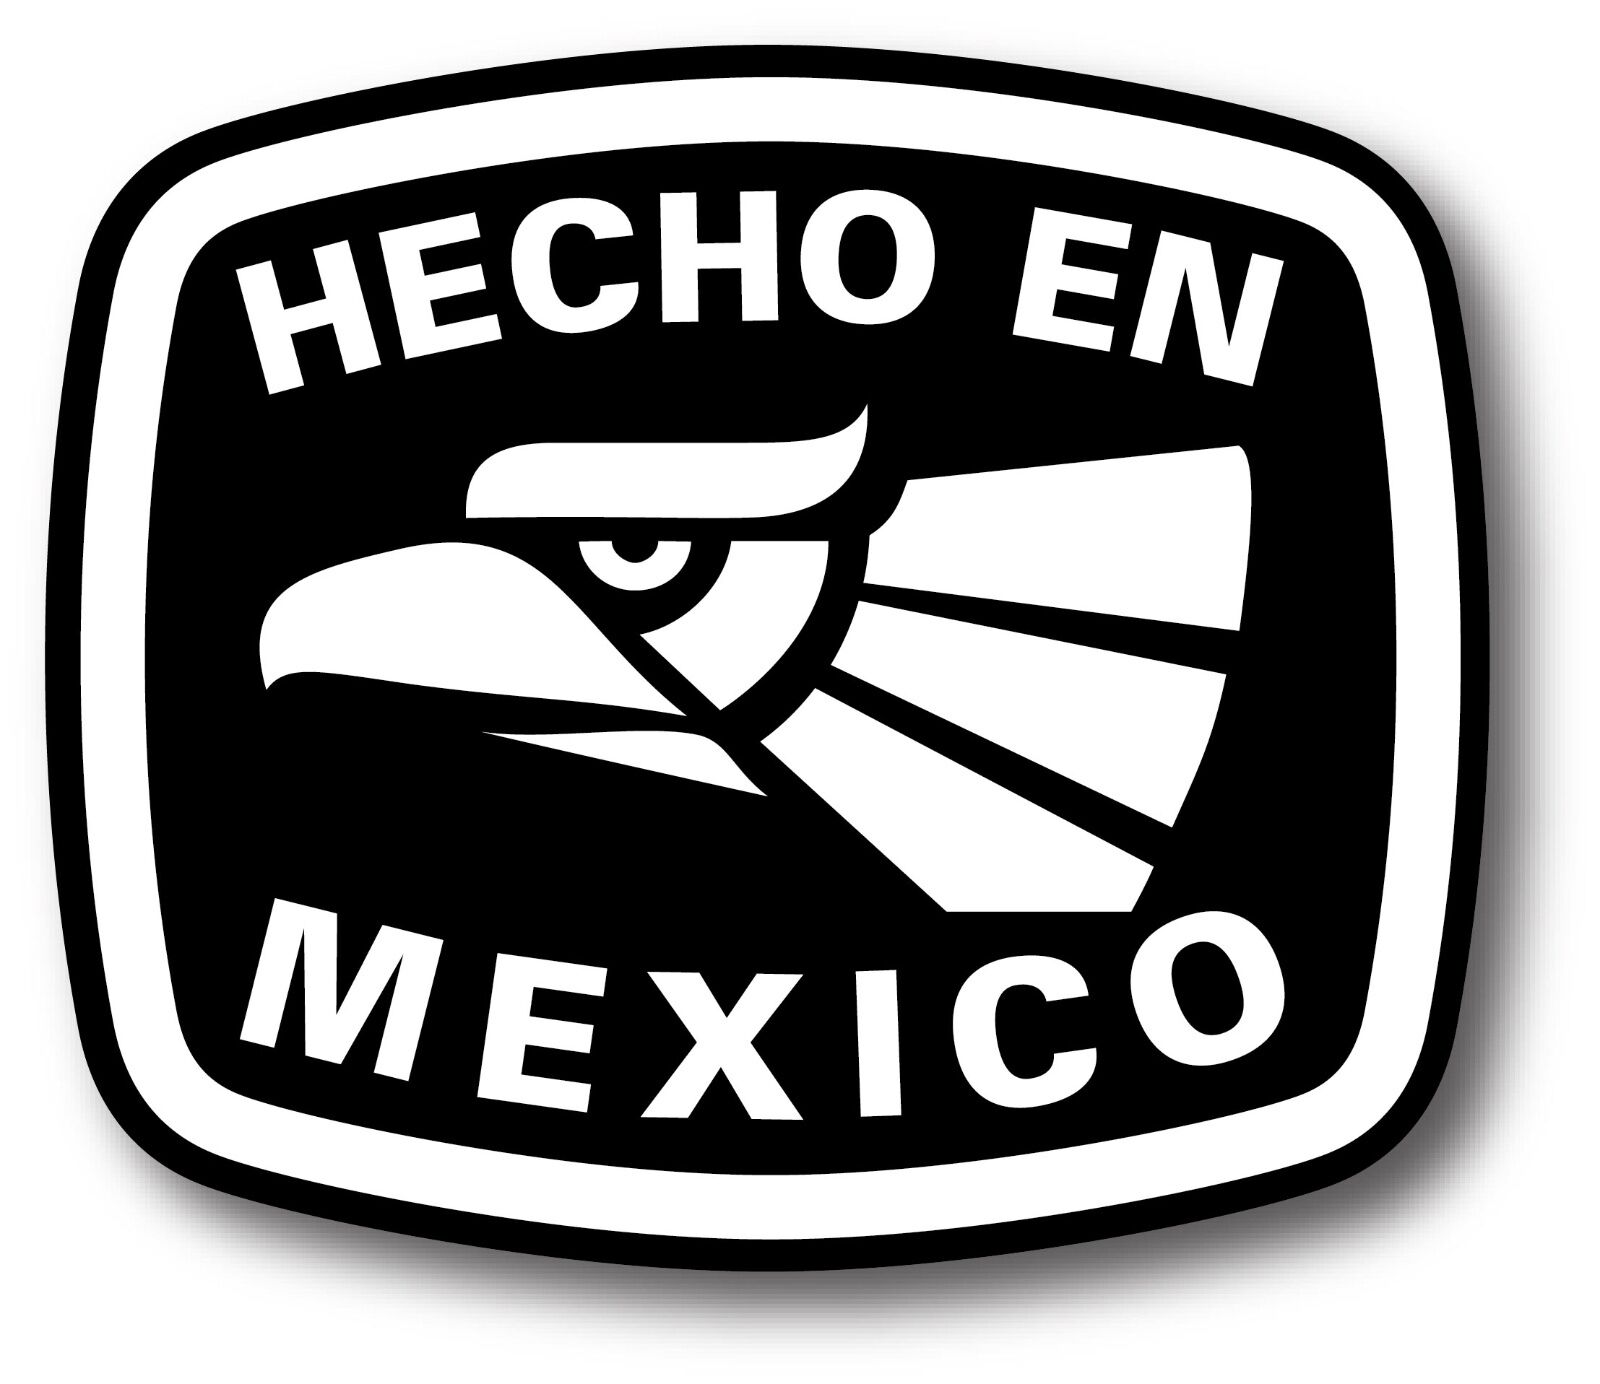 Hecho En Mexico Sticker Decal Vinyl Made In Mexico Sticker Decal (Spanish)